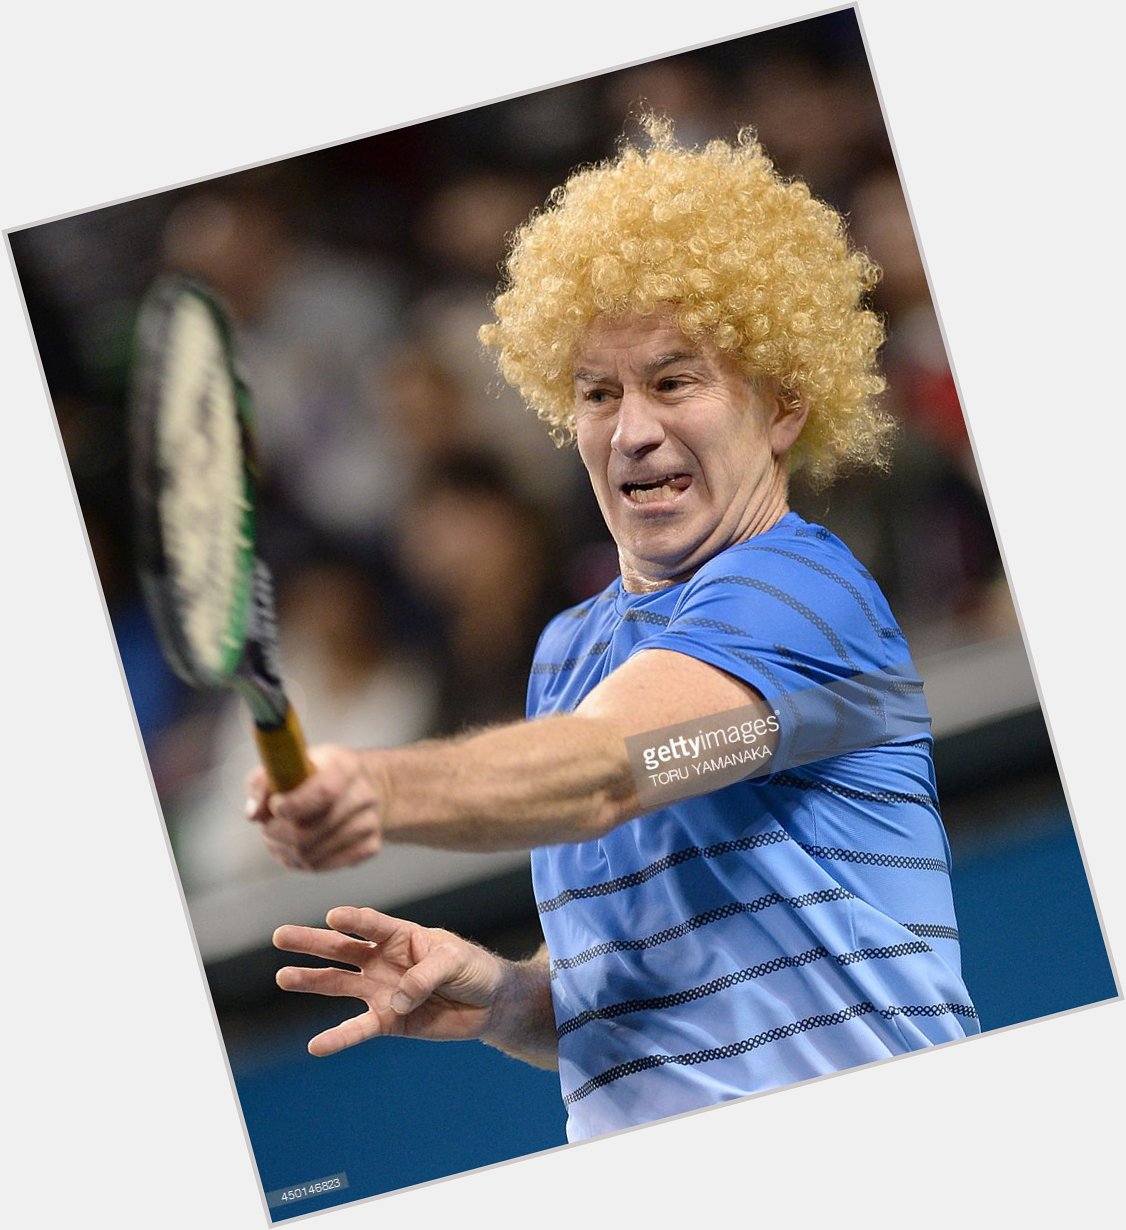 Happy 58th bday to Tennis HOFer John McEnroe, who went with the retro look in a recent match :) 